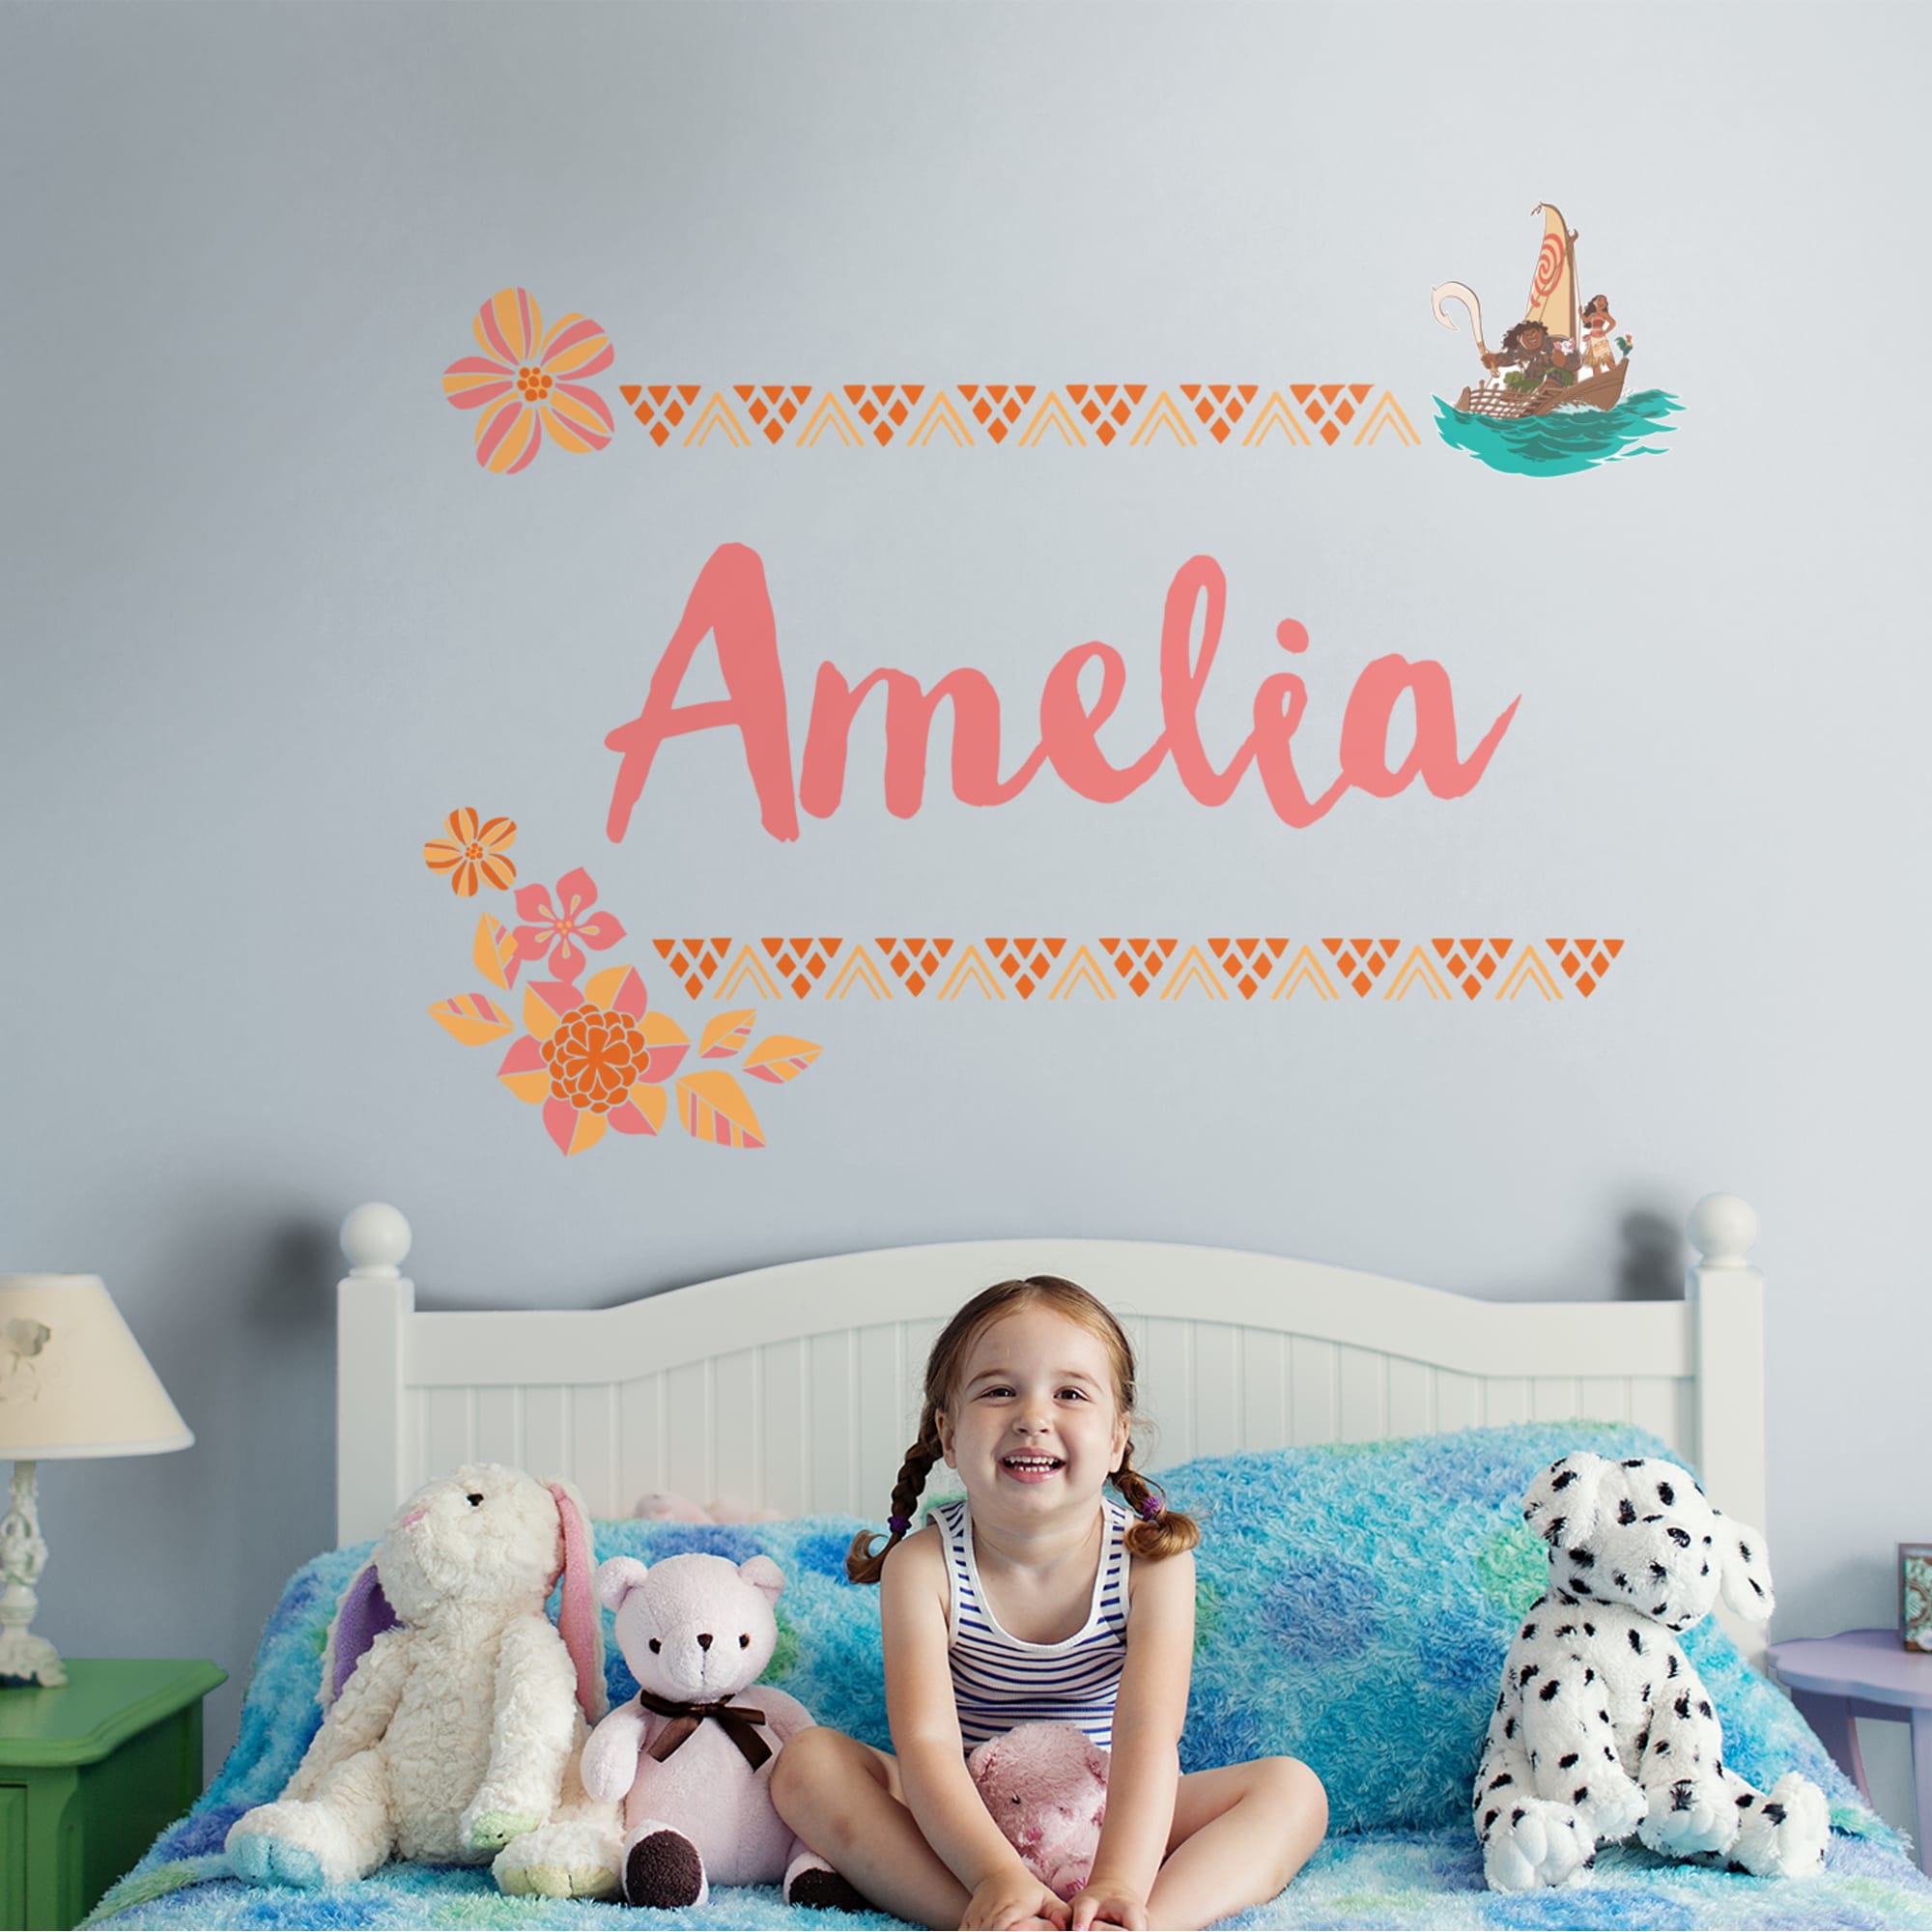 Moana: Script Personalized Name - Officially Licensed Disney Transfer Decal by Fathead | Vinyl